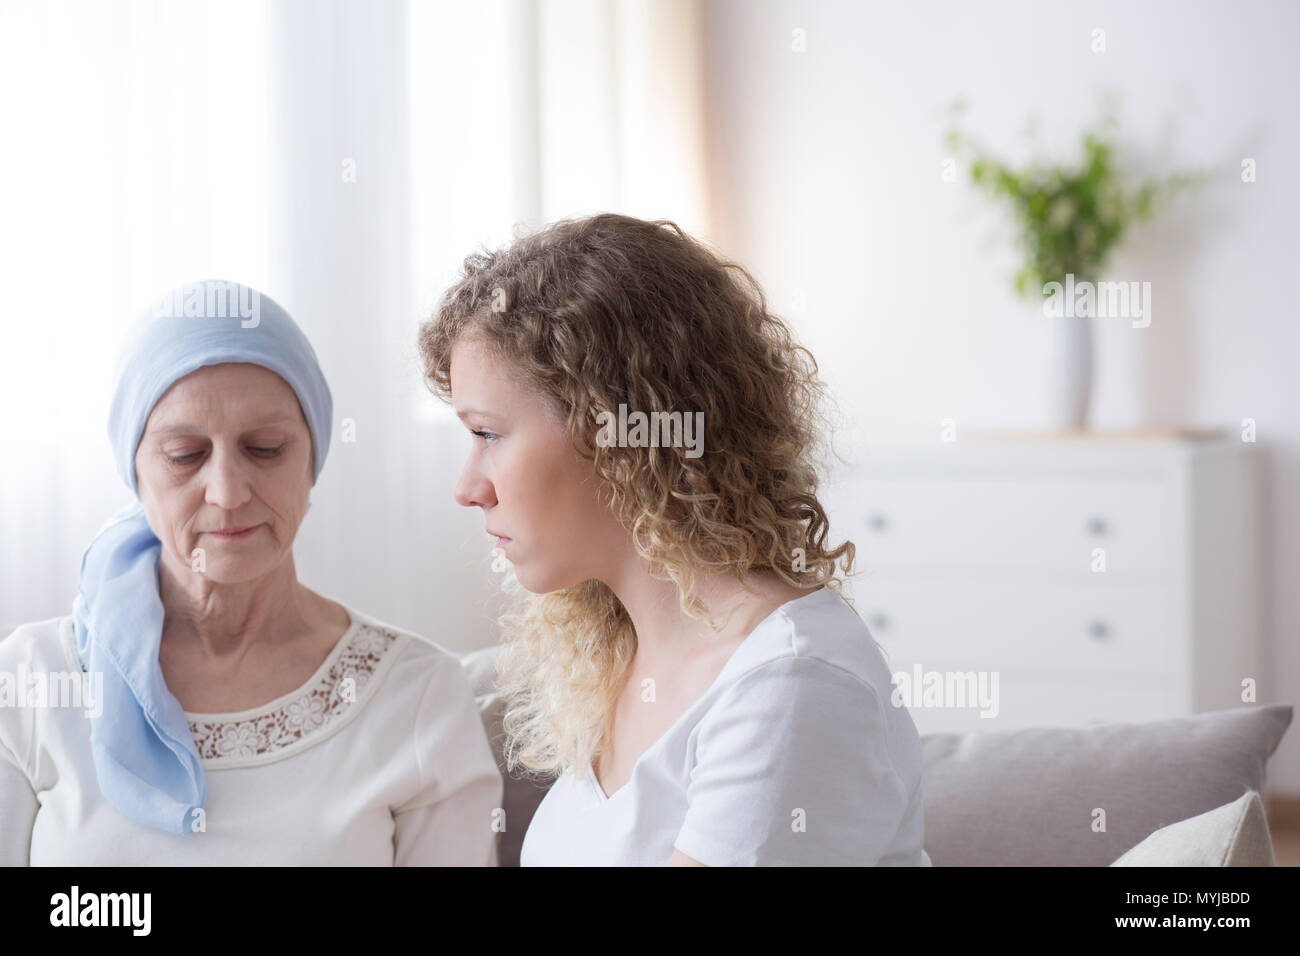 Sad senior woman with cancer wearing a blue headscarf during a meeting with caregiver Stock Photo